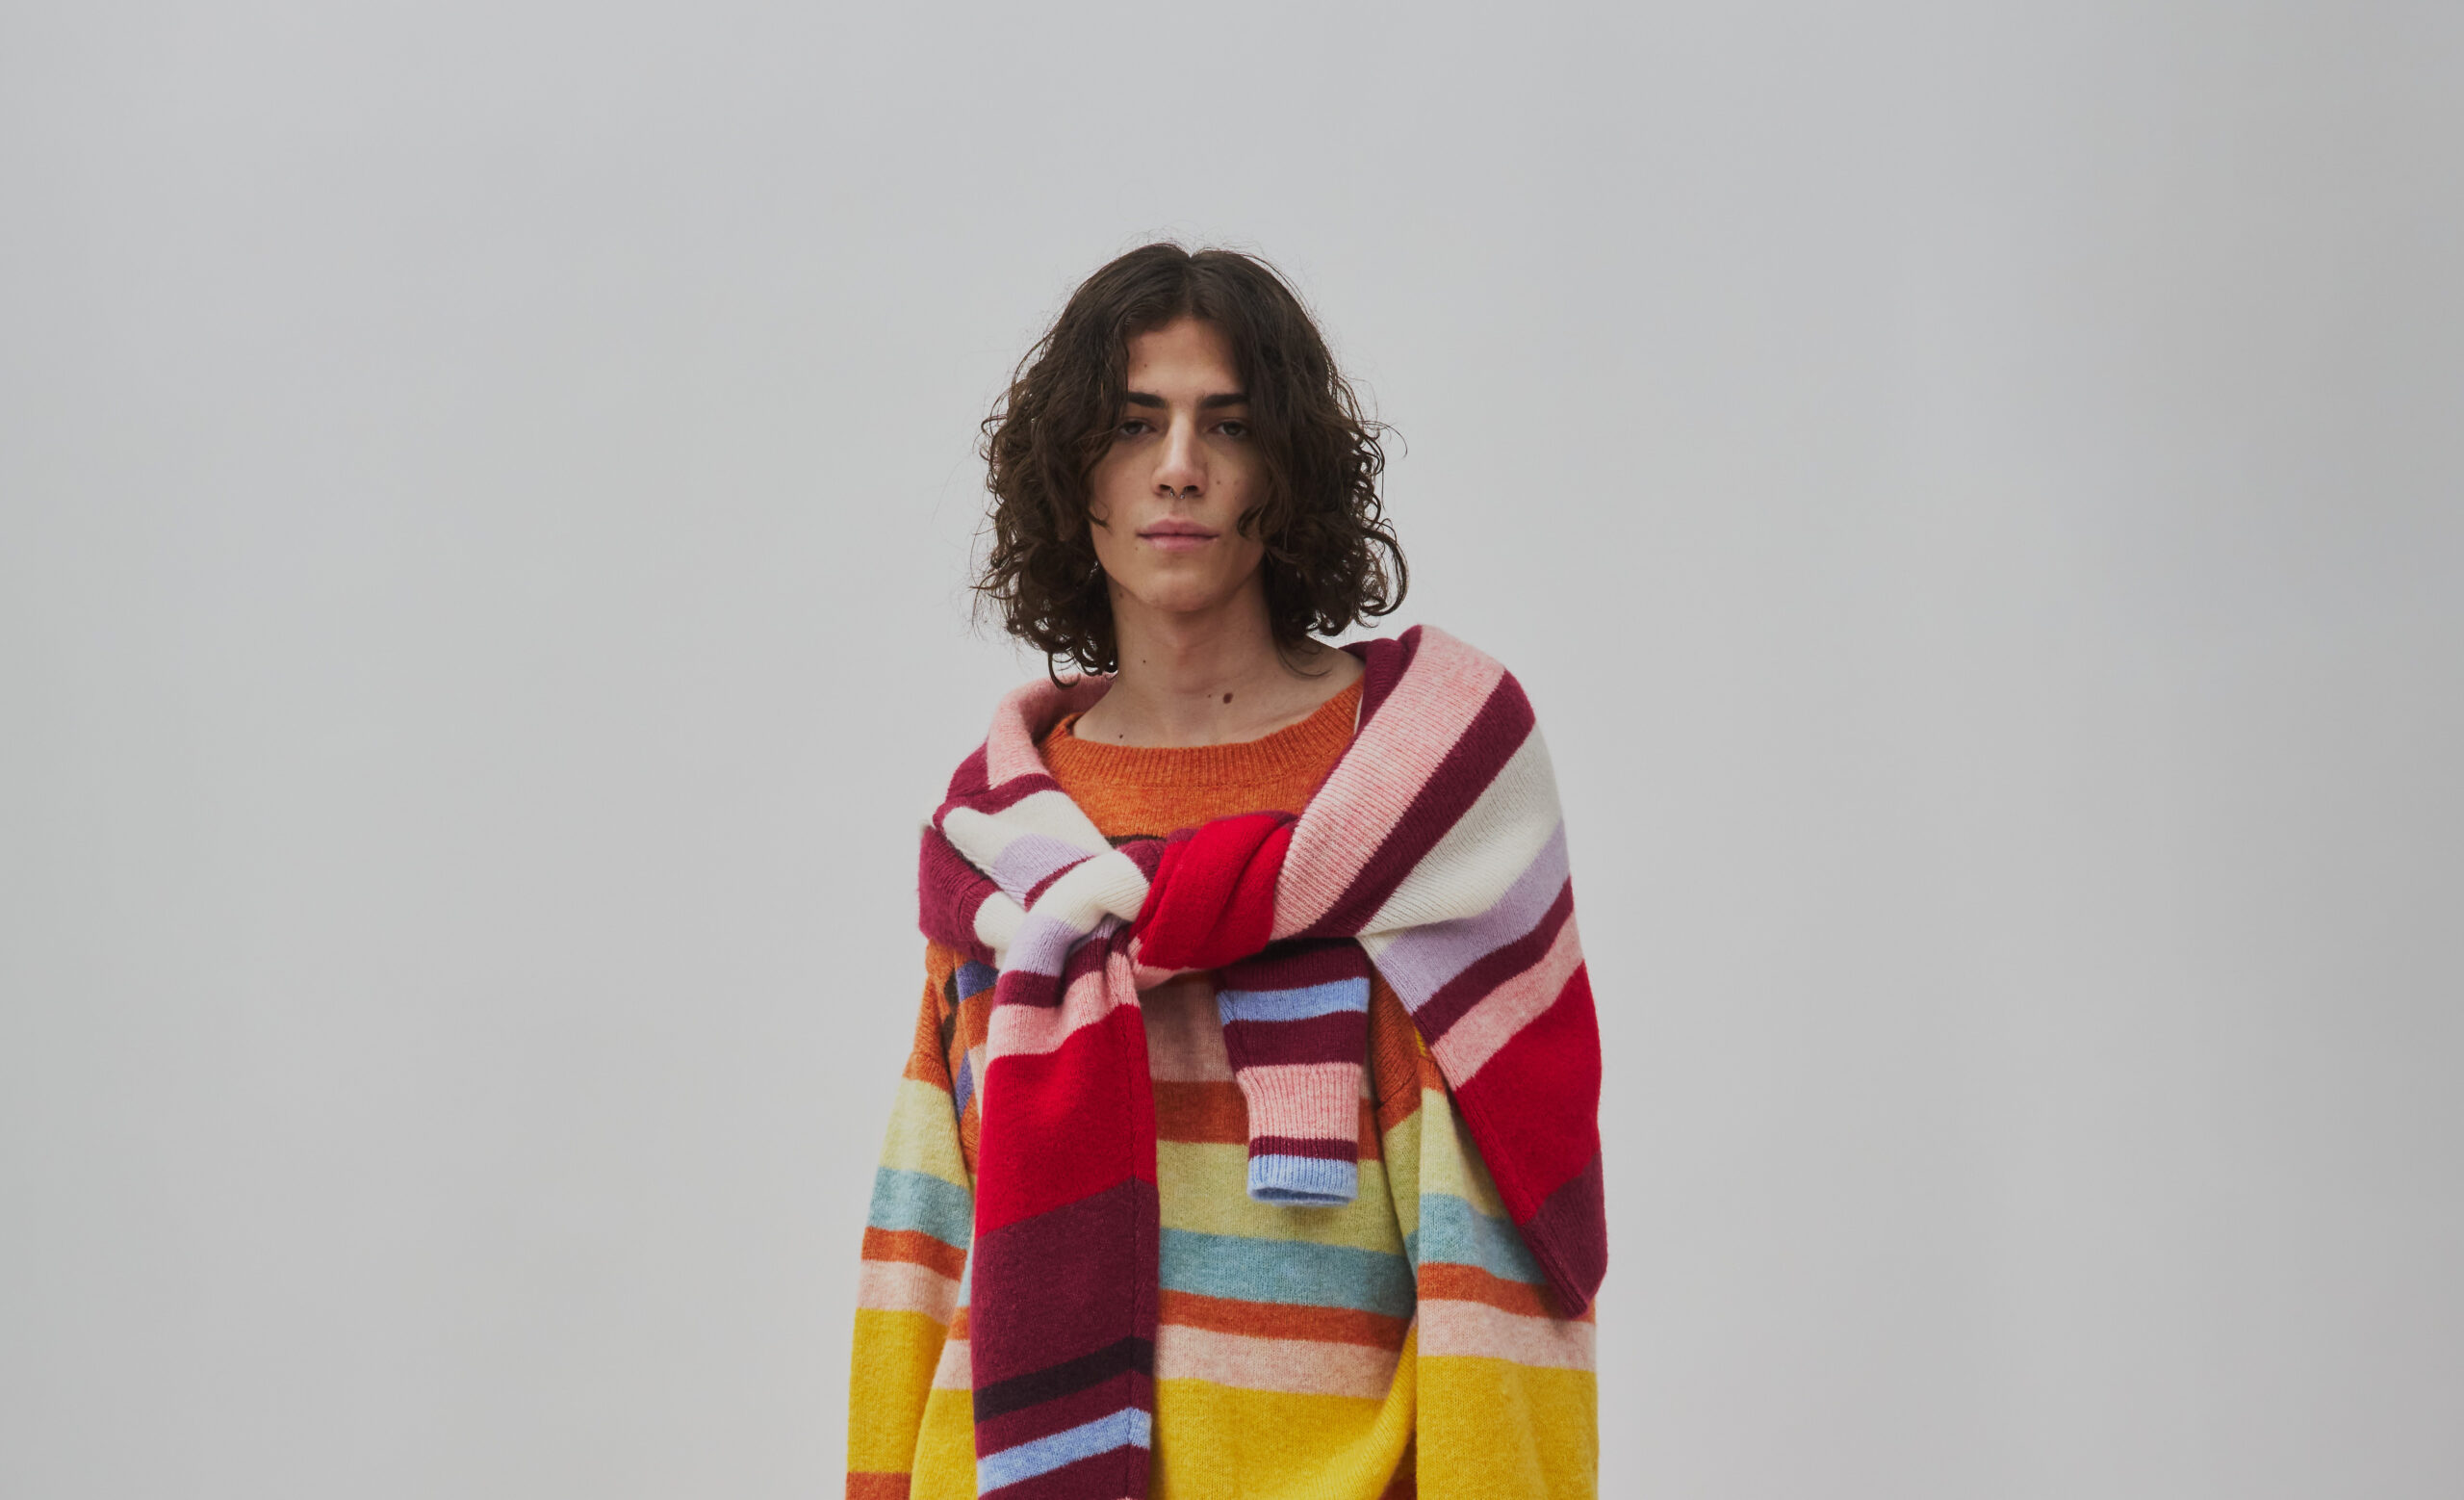 A model poses in an oversized, multicolored knit ensemble from Bulan's 'Garbage Collector' collection. The piece features a mix of warm and cool stripes, with hues of red, orange, yellow, blue, and white, creating a cozy yet striking visual appeal.